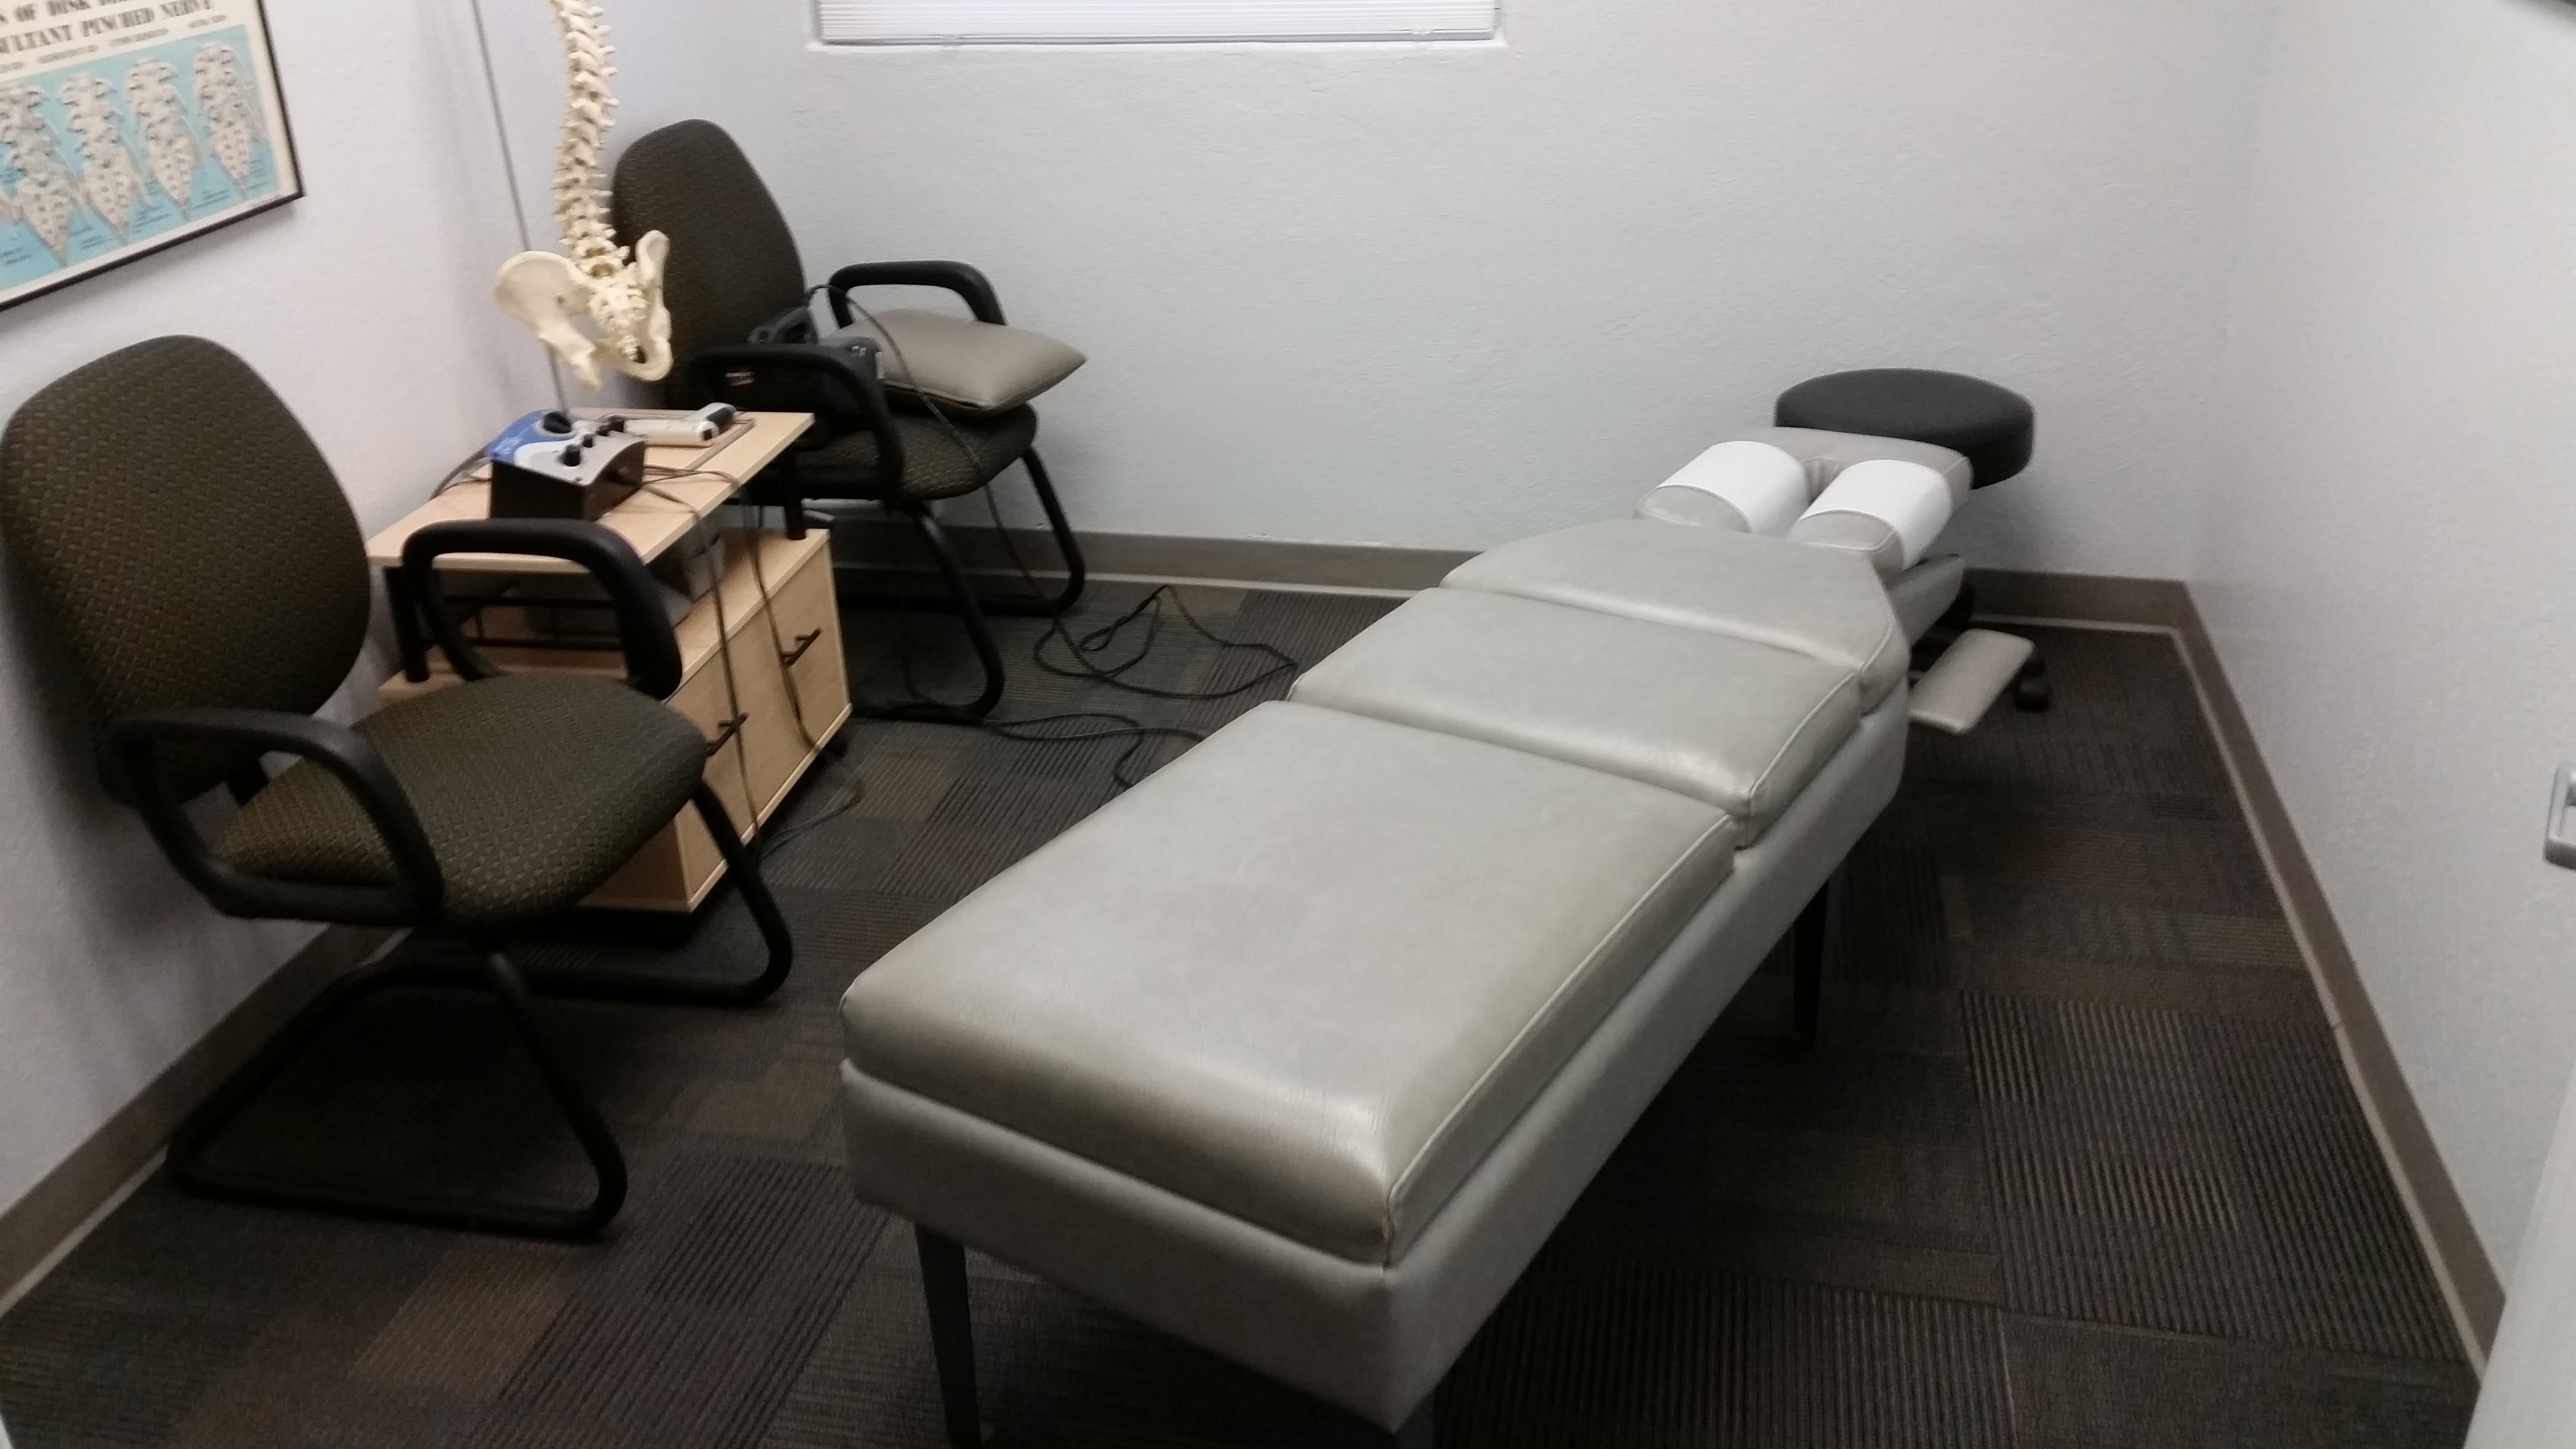 view of chiro therapy room with adjustment table and low-volt electrotherapy machine